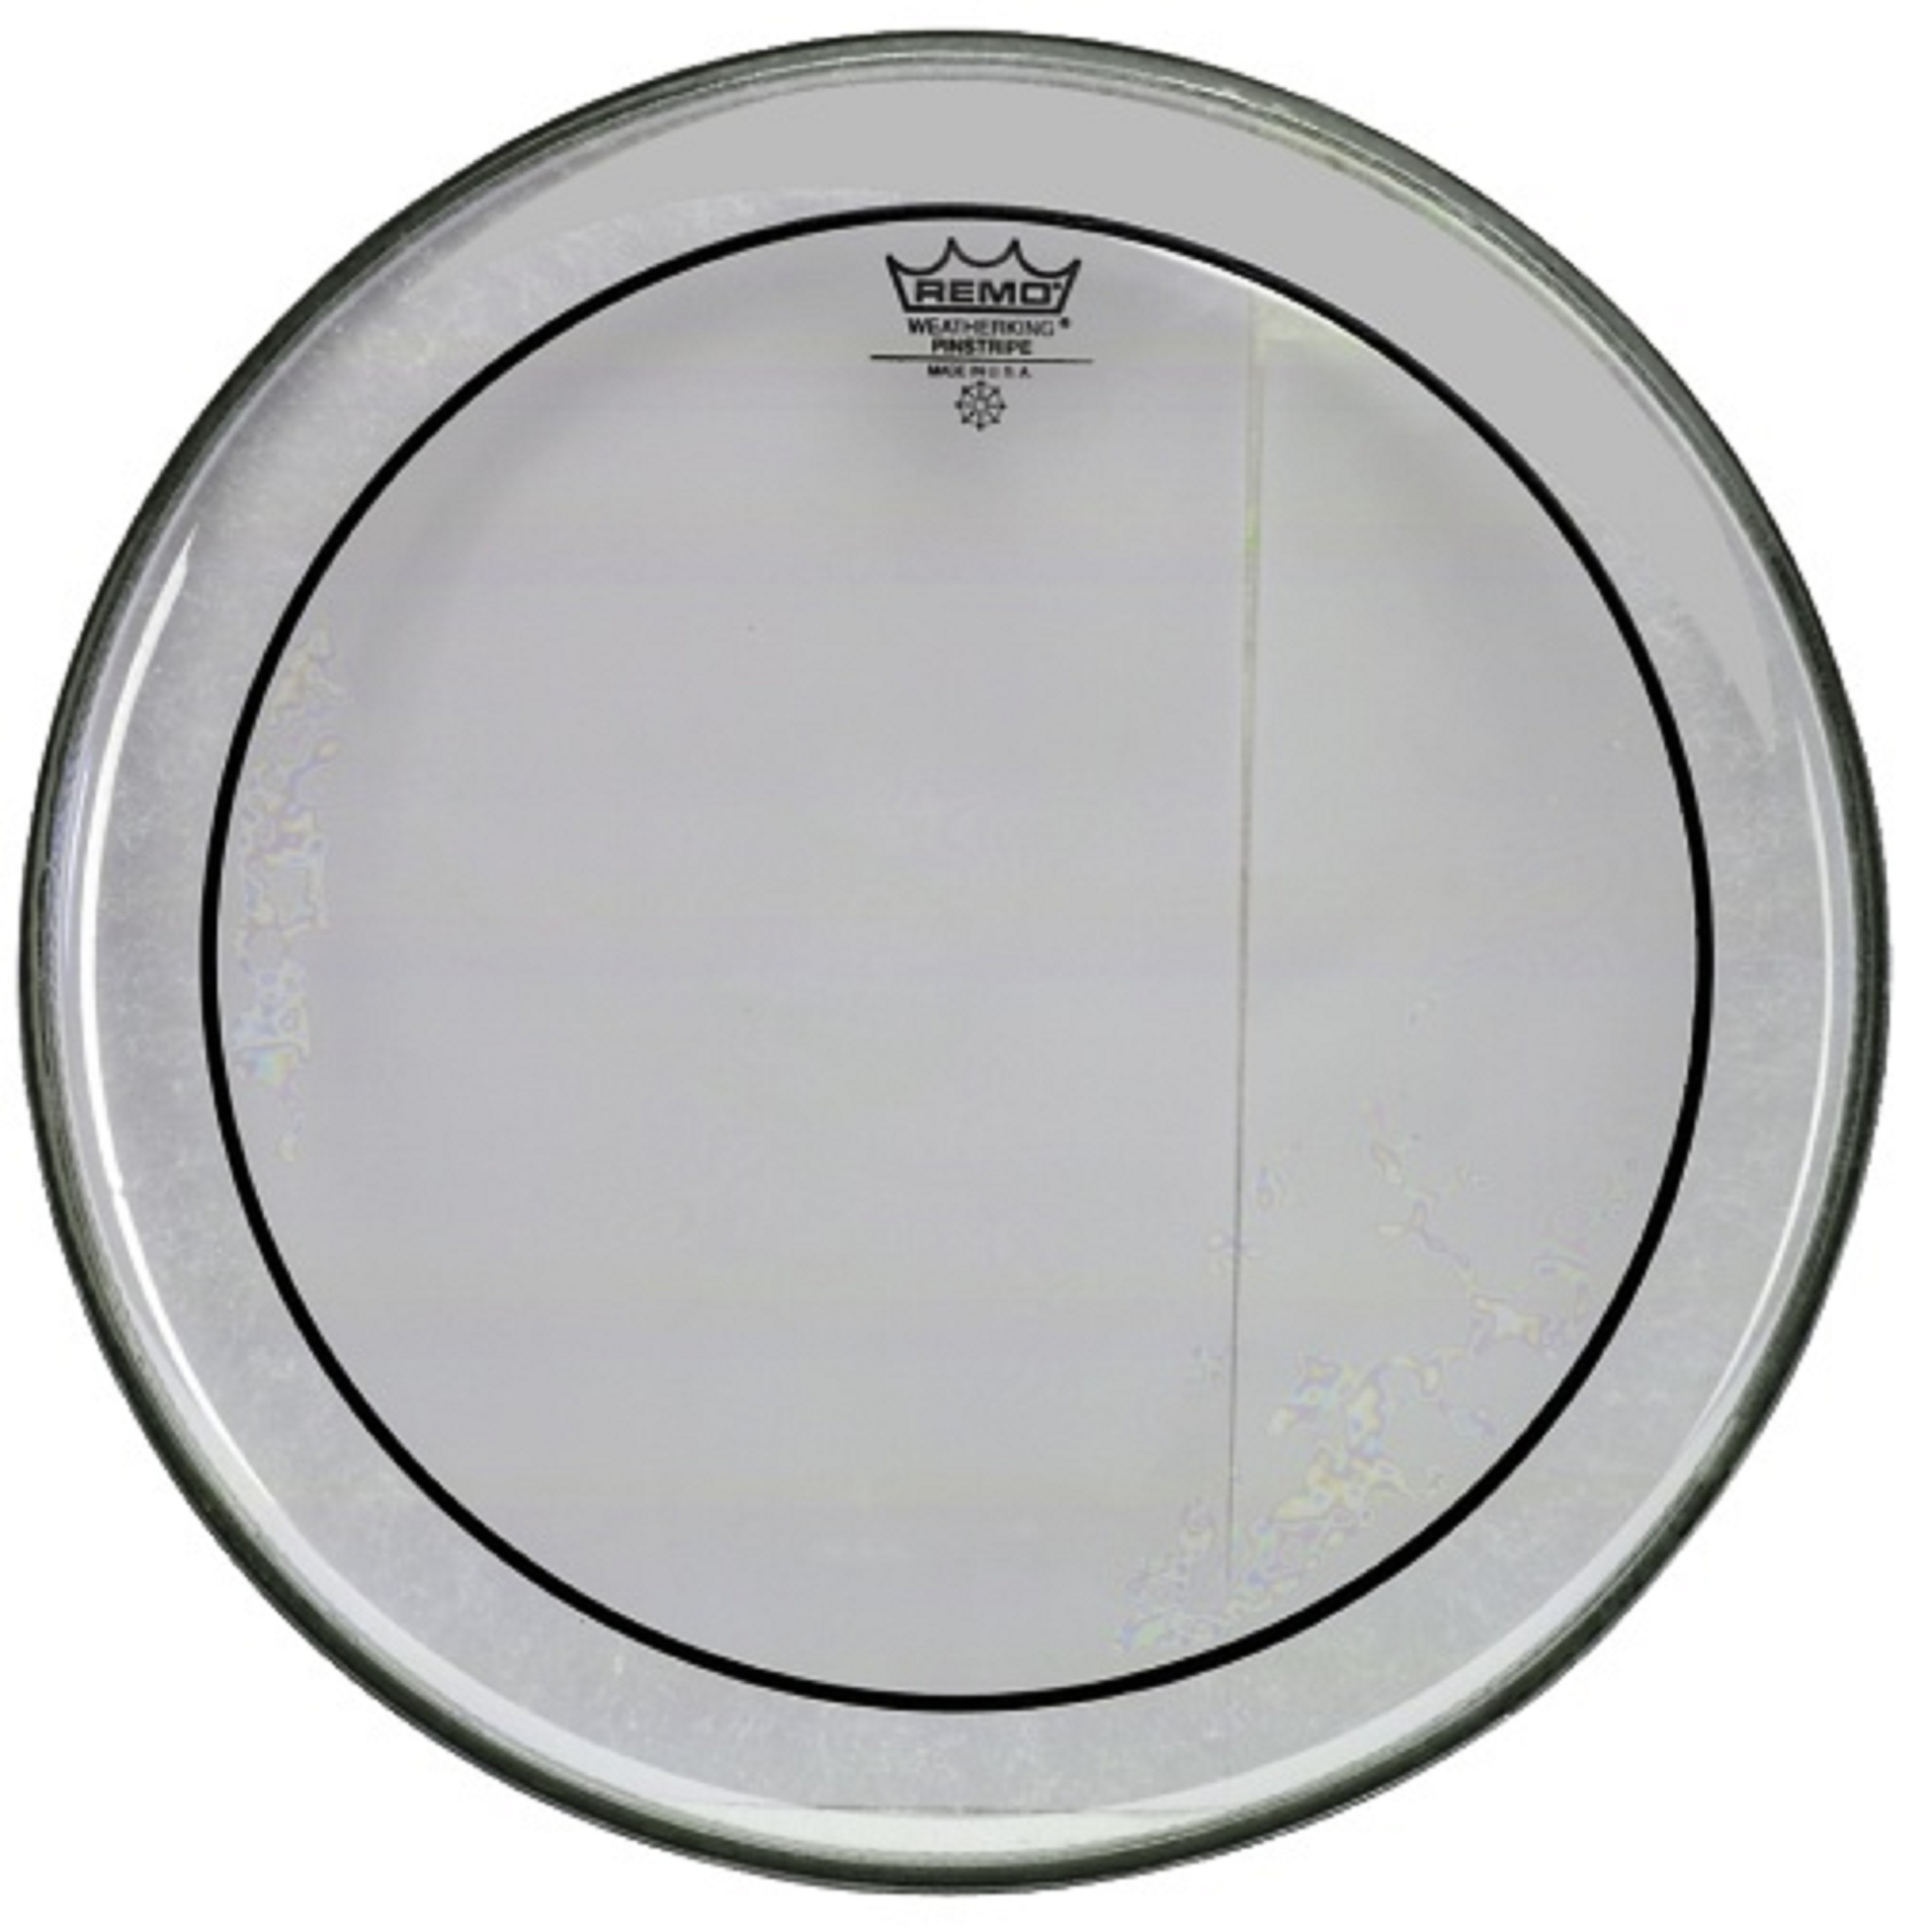 Remo Fell Pinstripe 12" Clear